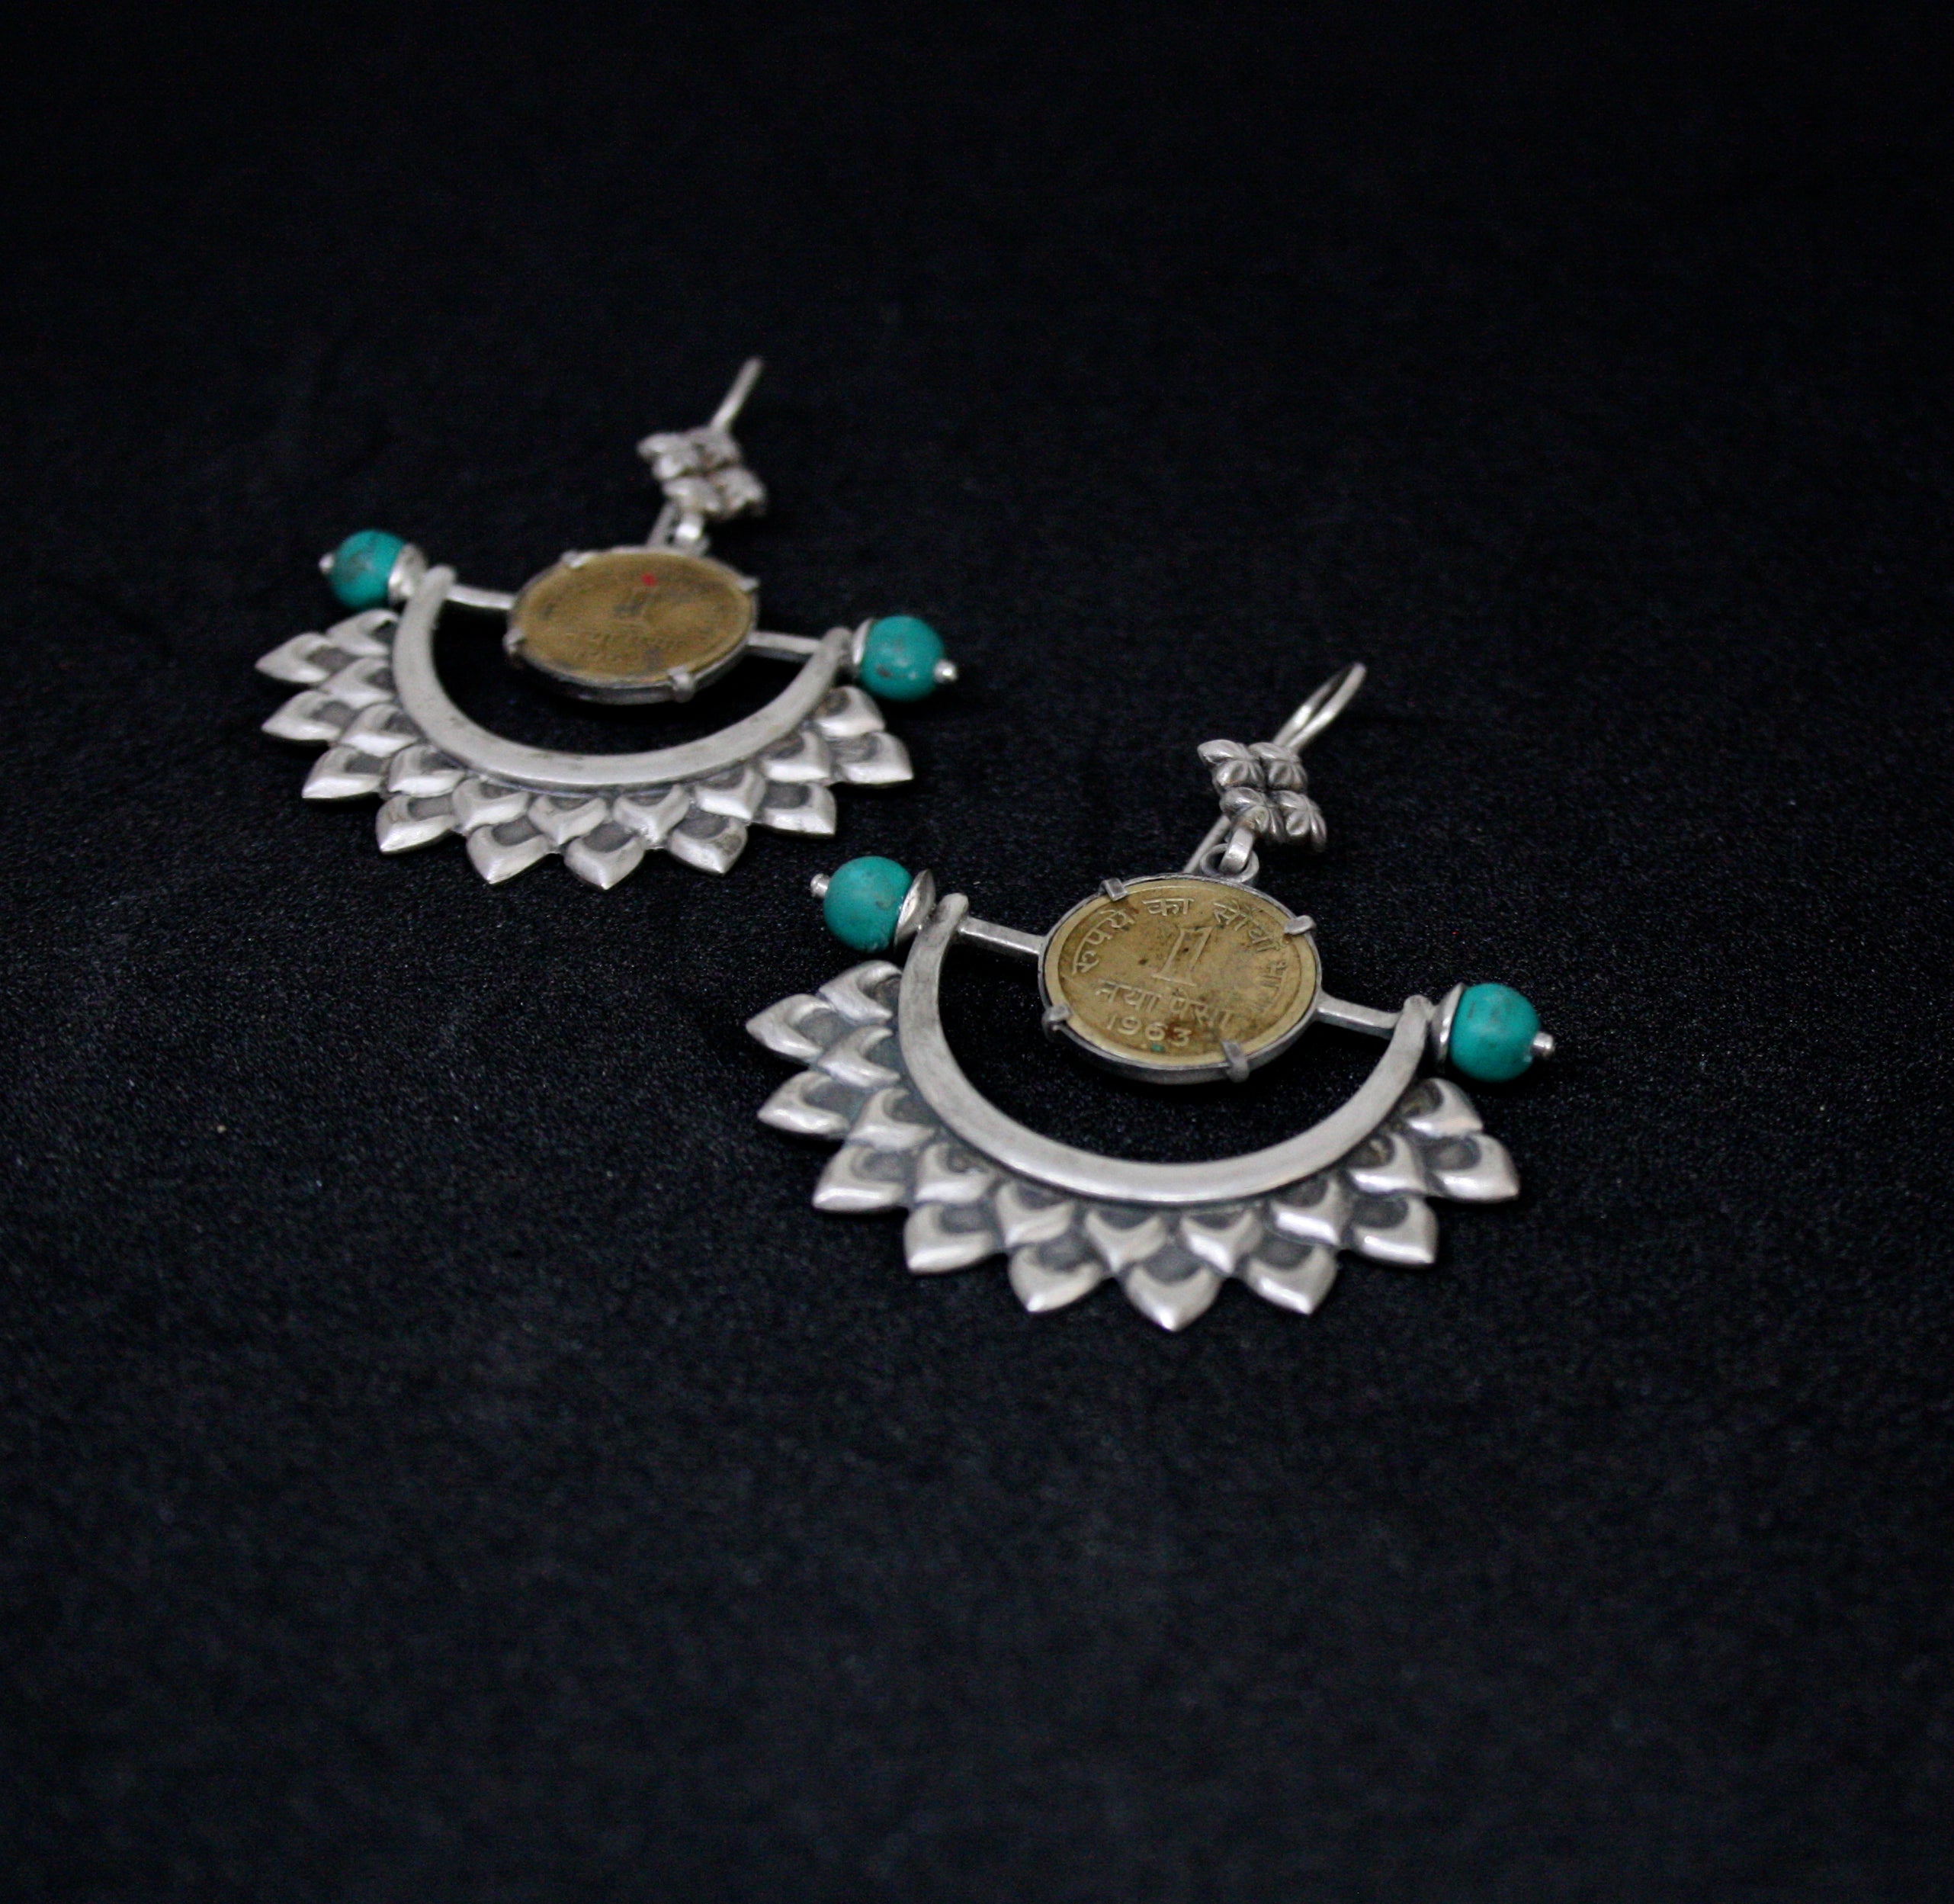 Buy online trendy silver earrings with stones - Quirksmith